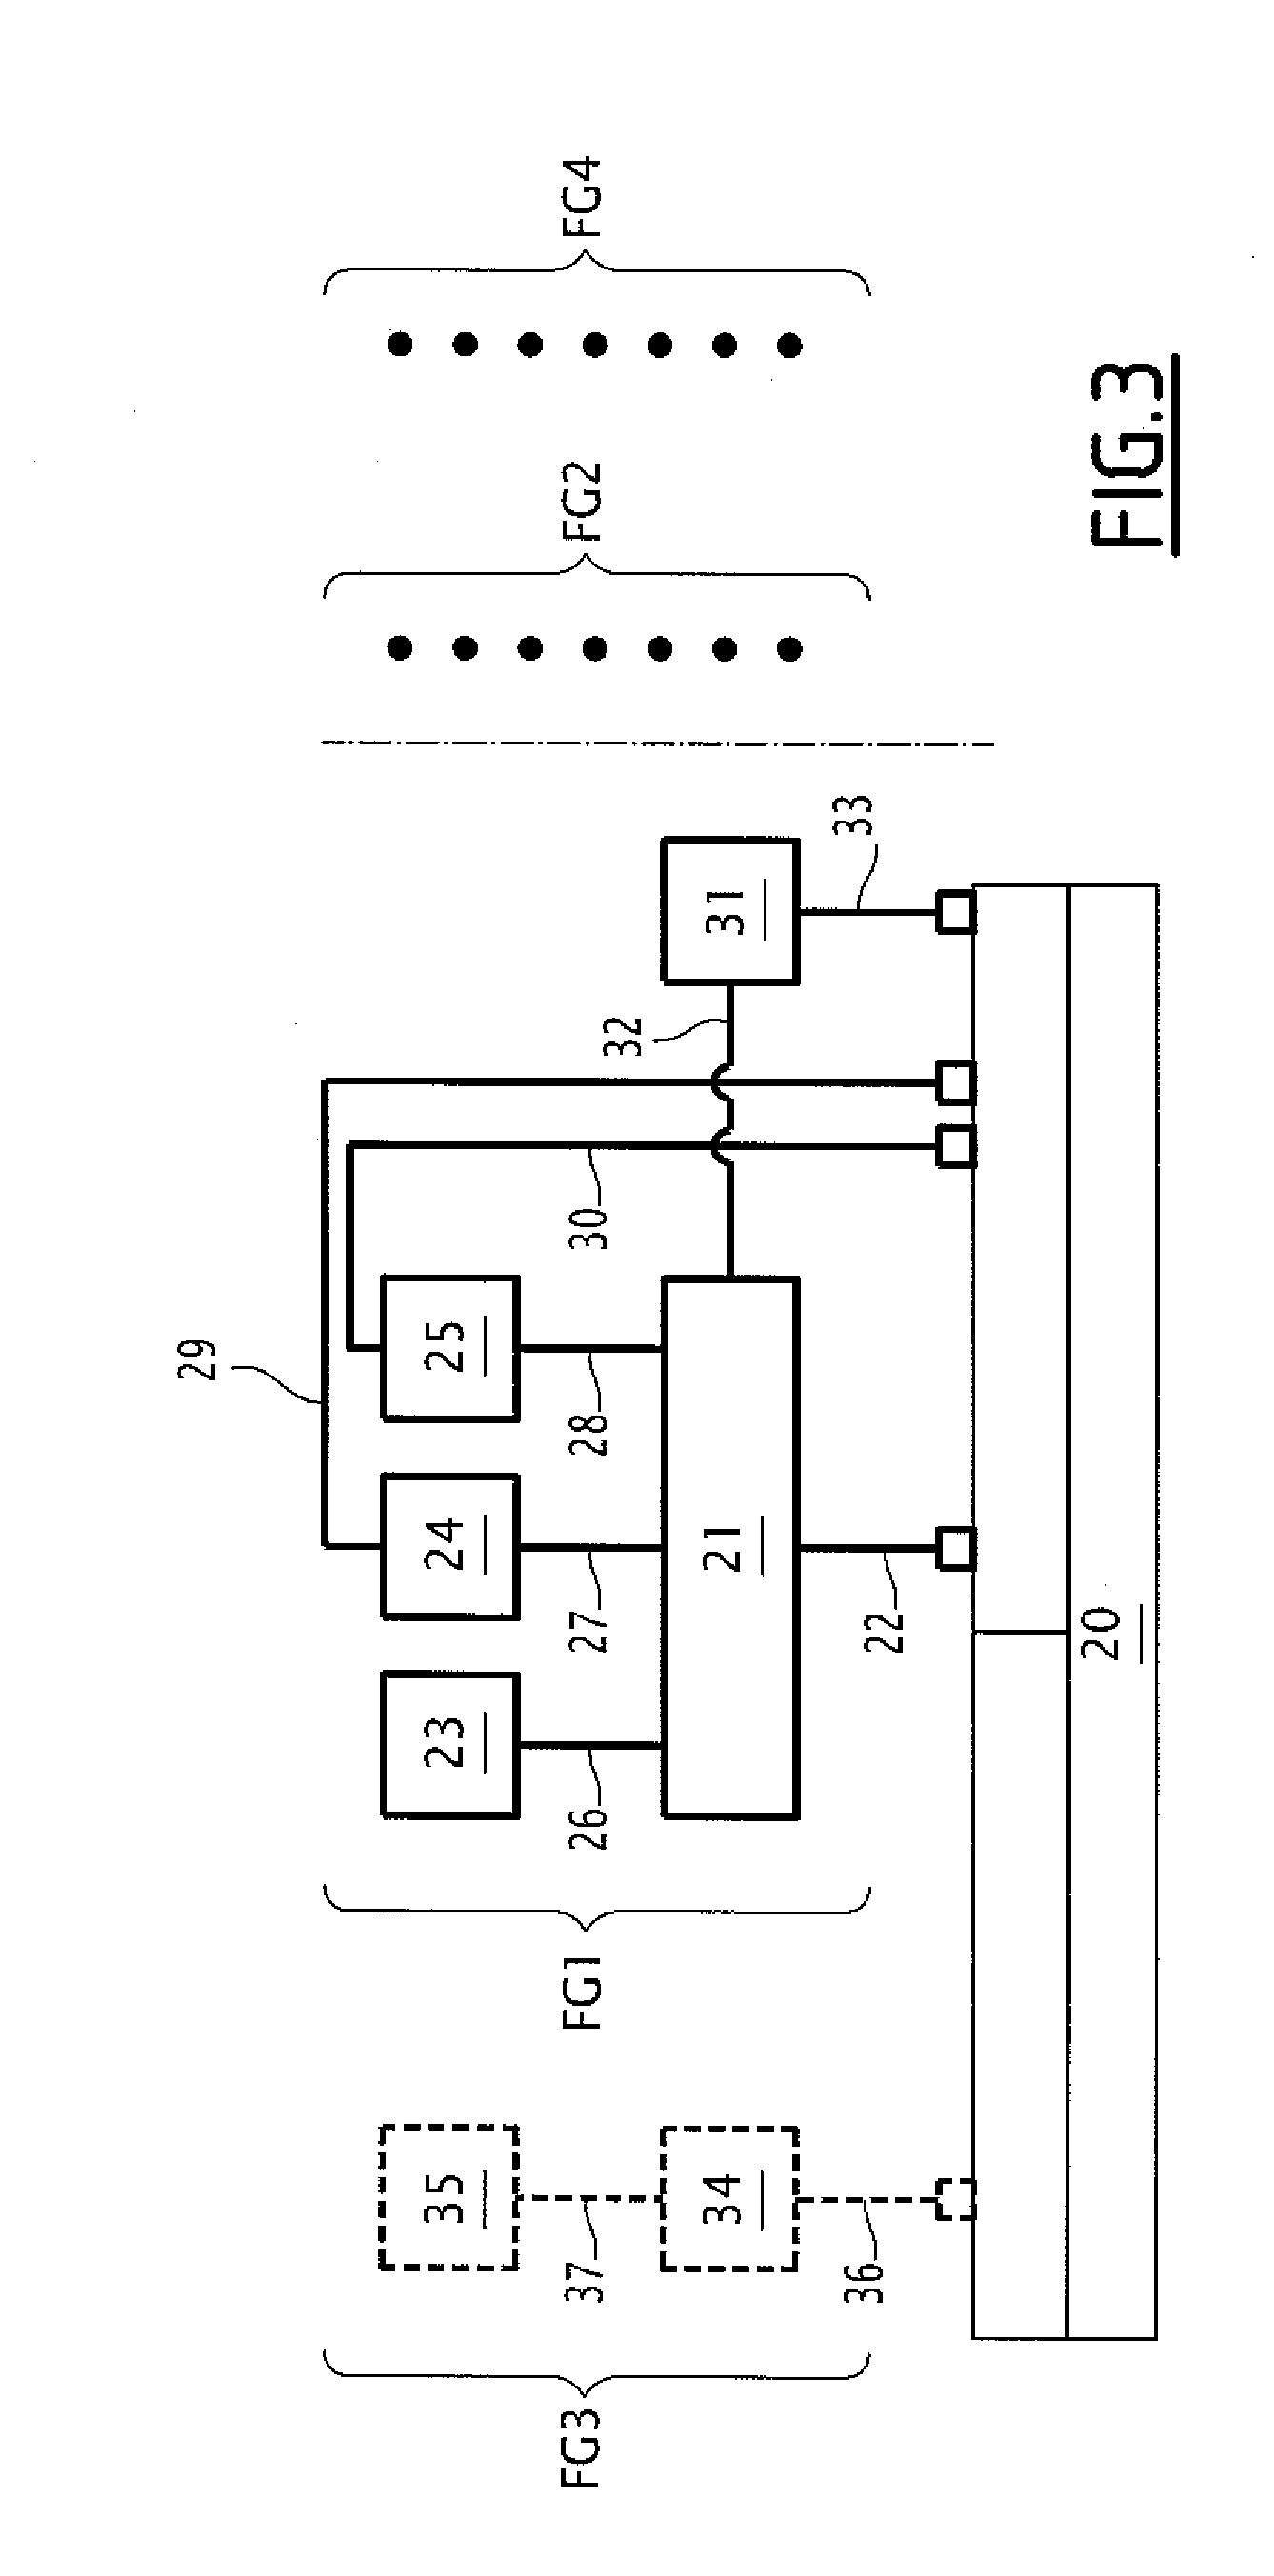 Method of designing a system of electrical wirings for a complex system, and corresponding complex system